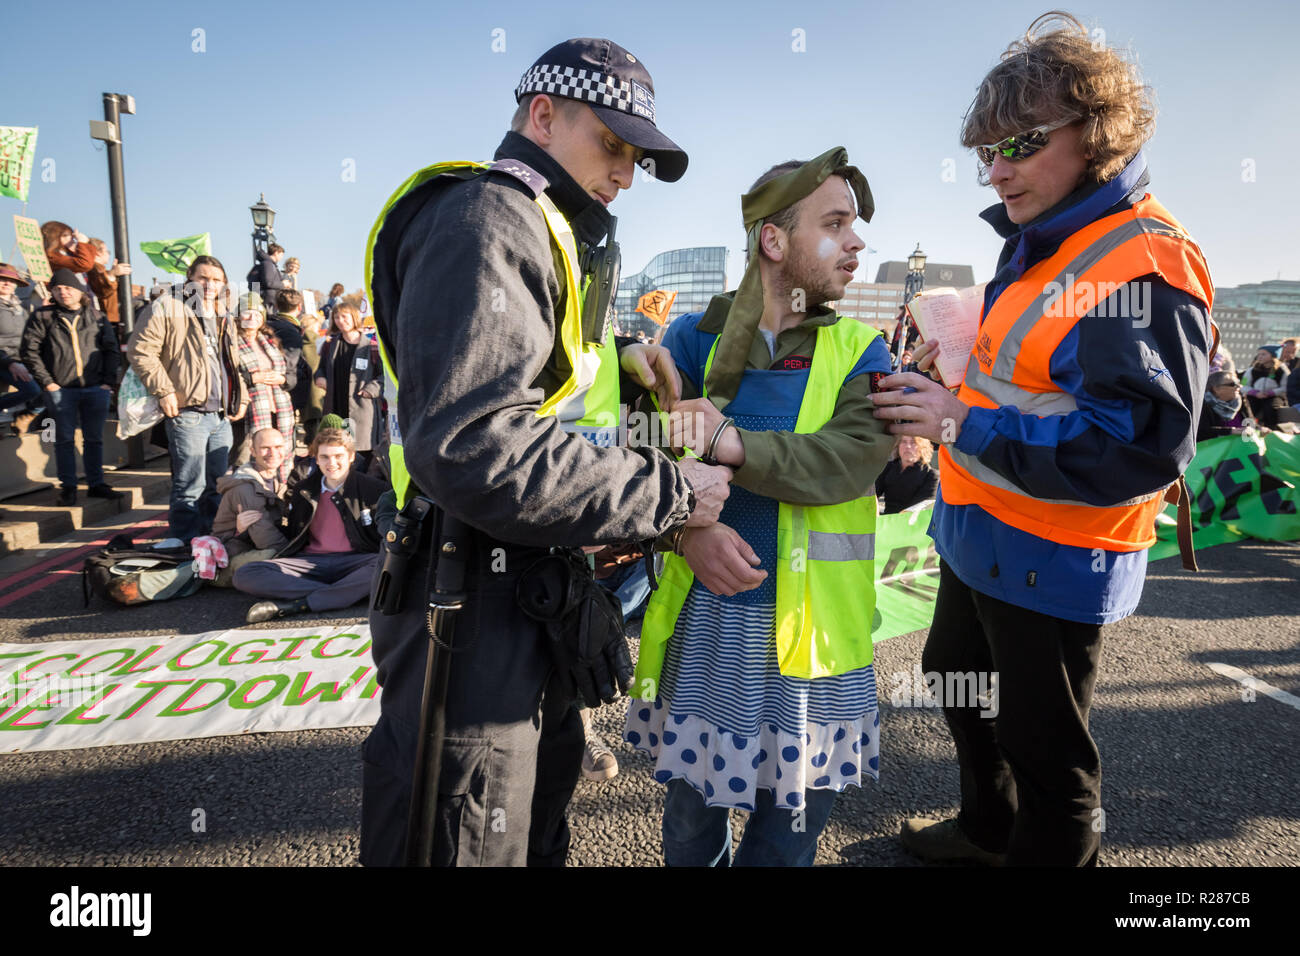 London, UK. 17th November, 2018. Environmental campaigners from Extinction Rebellion block Lambeth Bridge, one of five bridges blocked in central London, as part of a Rebellion Day event to highlight 'criminal inaction in the face of climate change catastrophe and ecological collapse' by the UK Government as part of a programme of civil disobedience during which scores of campaigners have been arrested. Credit: Guy Corbishley/Alamy Live News Stock Photo